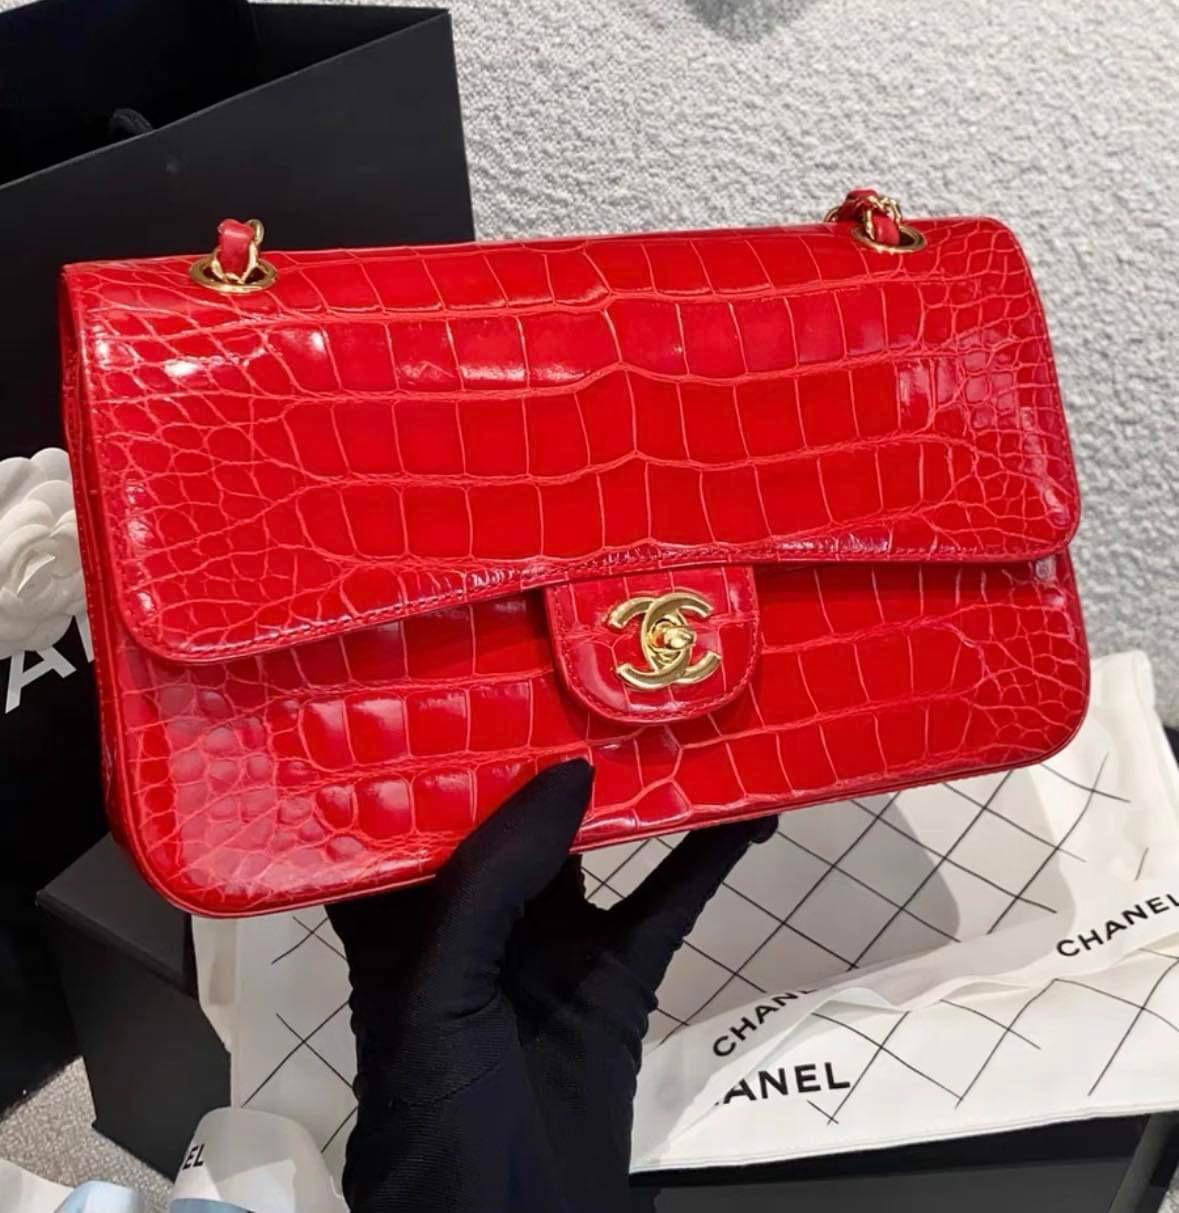 A SHINY RED ALLIGATOR MEDIUM CLASSIC DOUBLE FLAP WITH GOLD HARDWARE. Comes with dust bag, certificate of authenticity and the box. Bag is in great condition.
No CITES. 
Series 20xxxx. 2014 year.